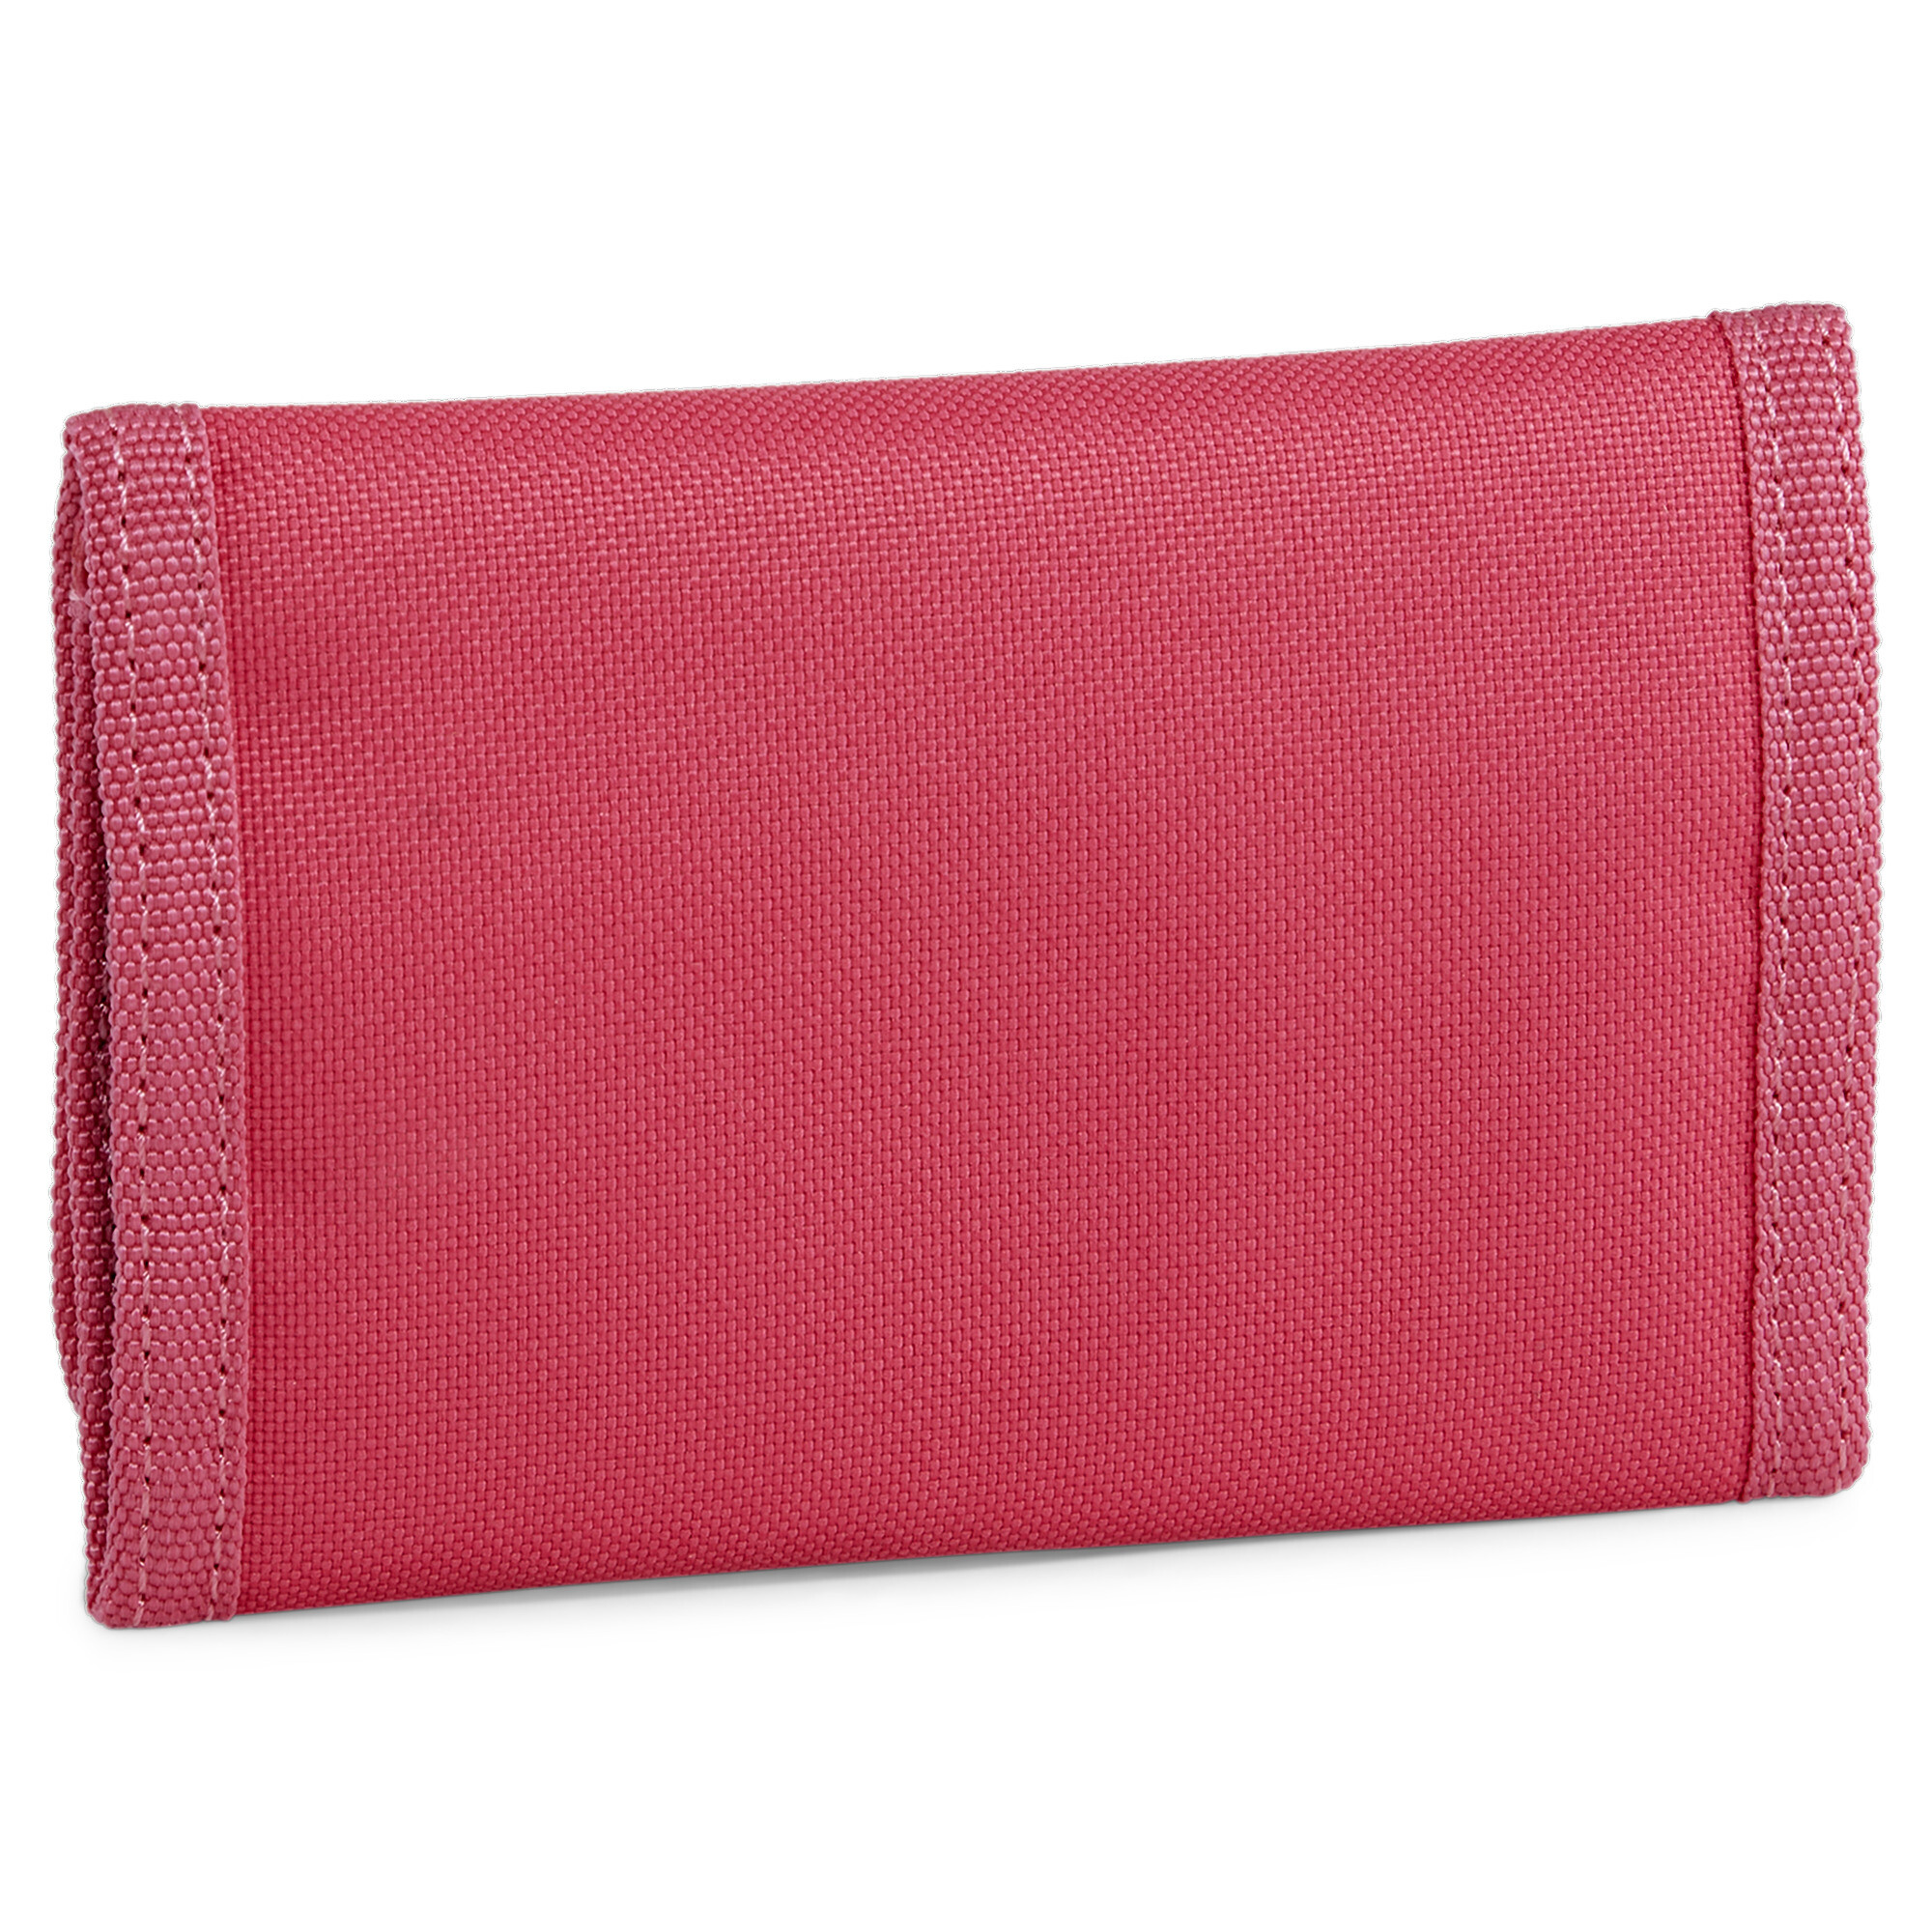 Puma Phase Wallet, Pink, Accessories